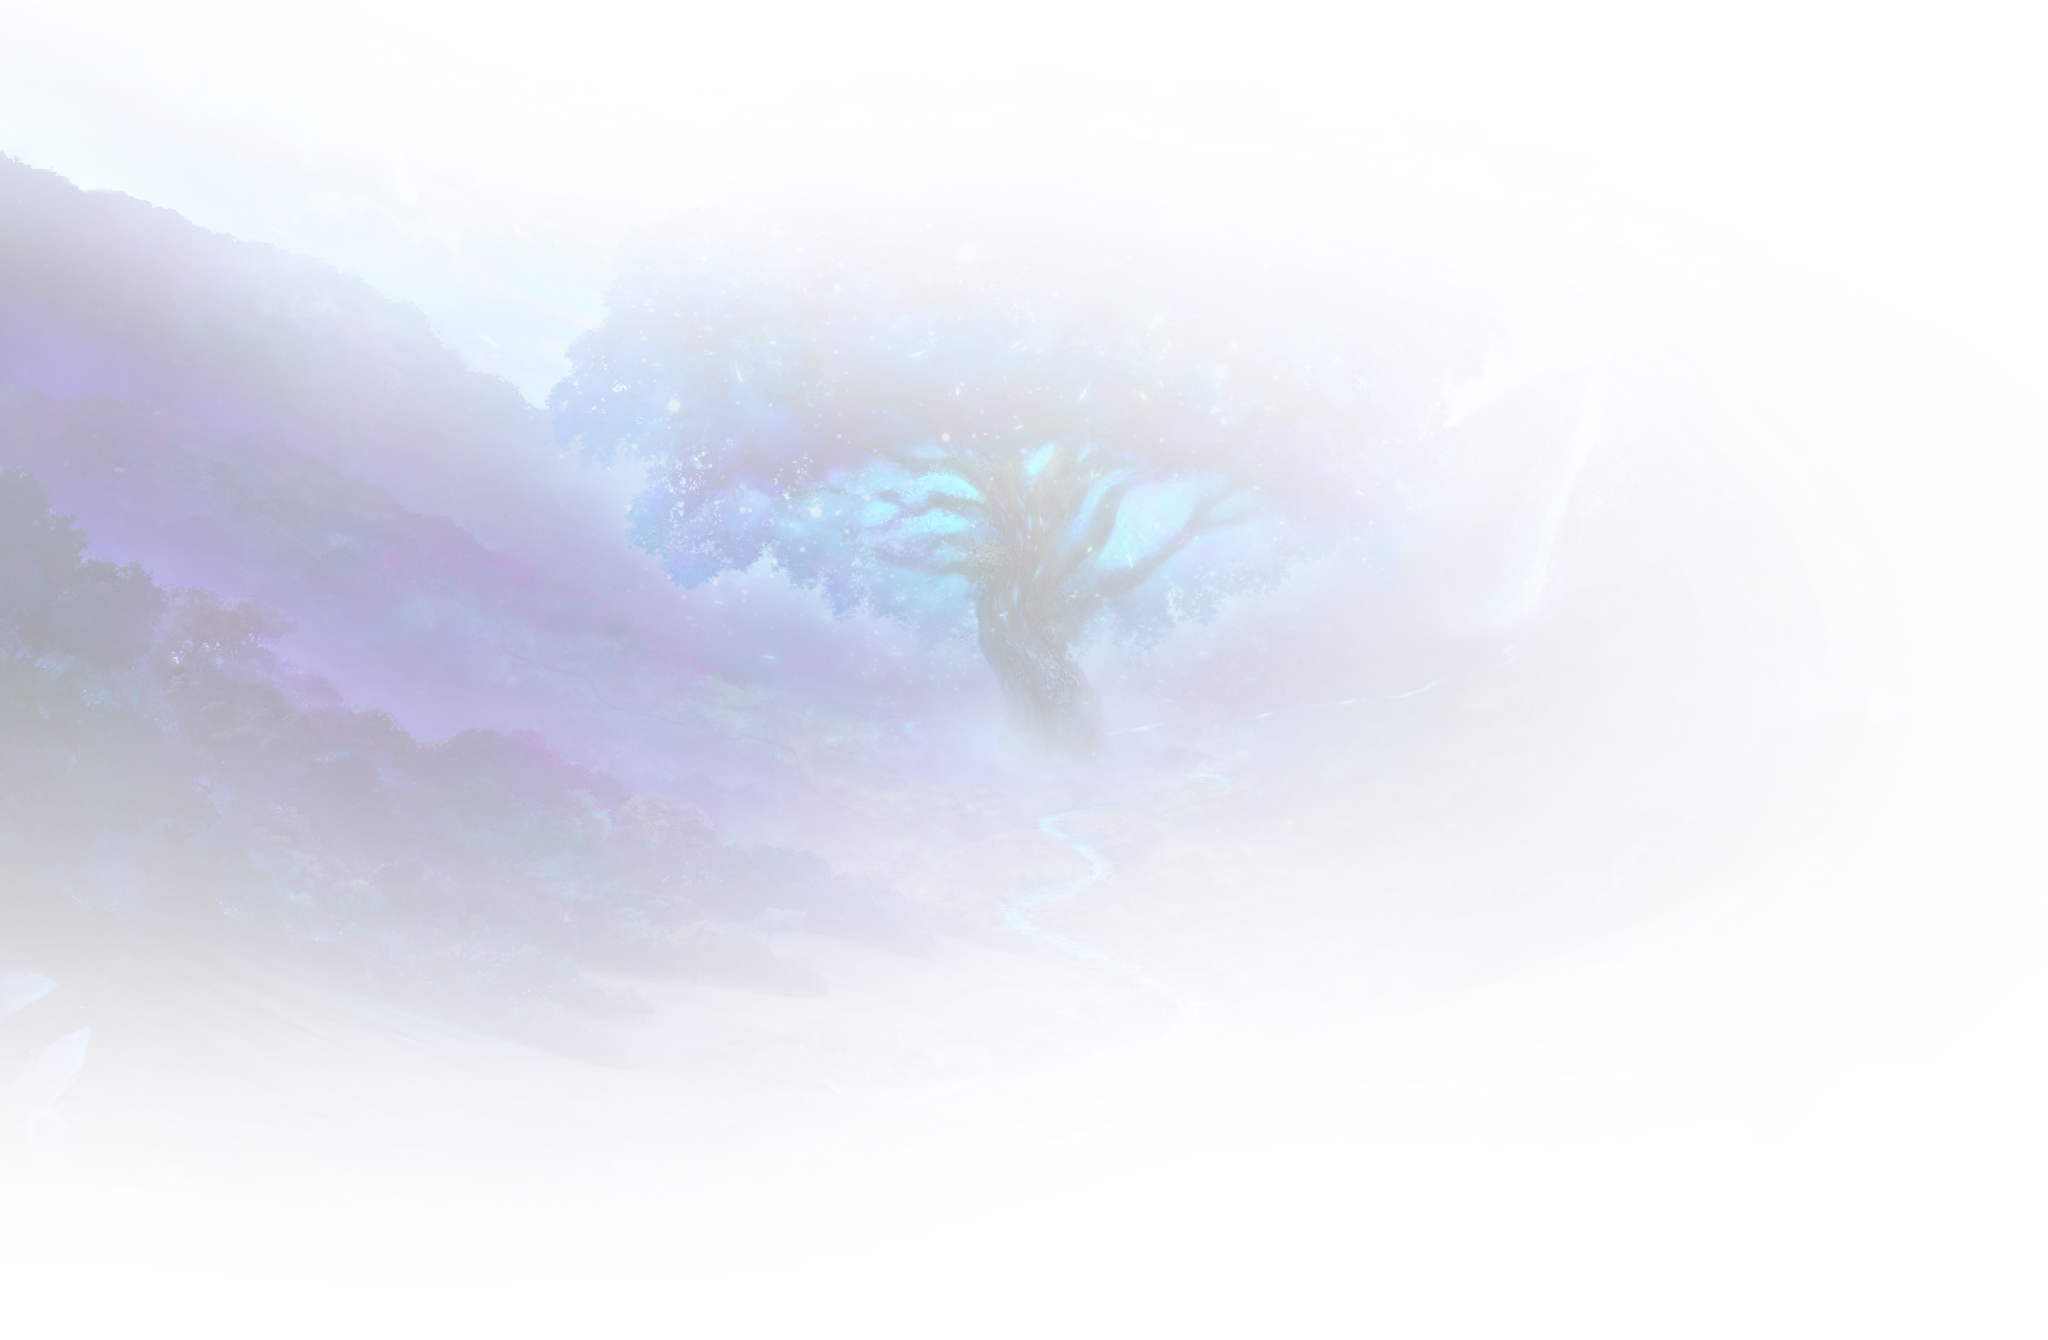 Mystical looking blue tree in a cloudy atmosphere